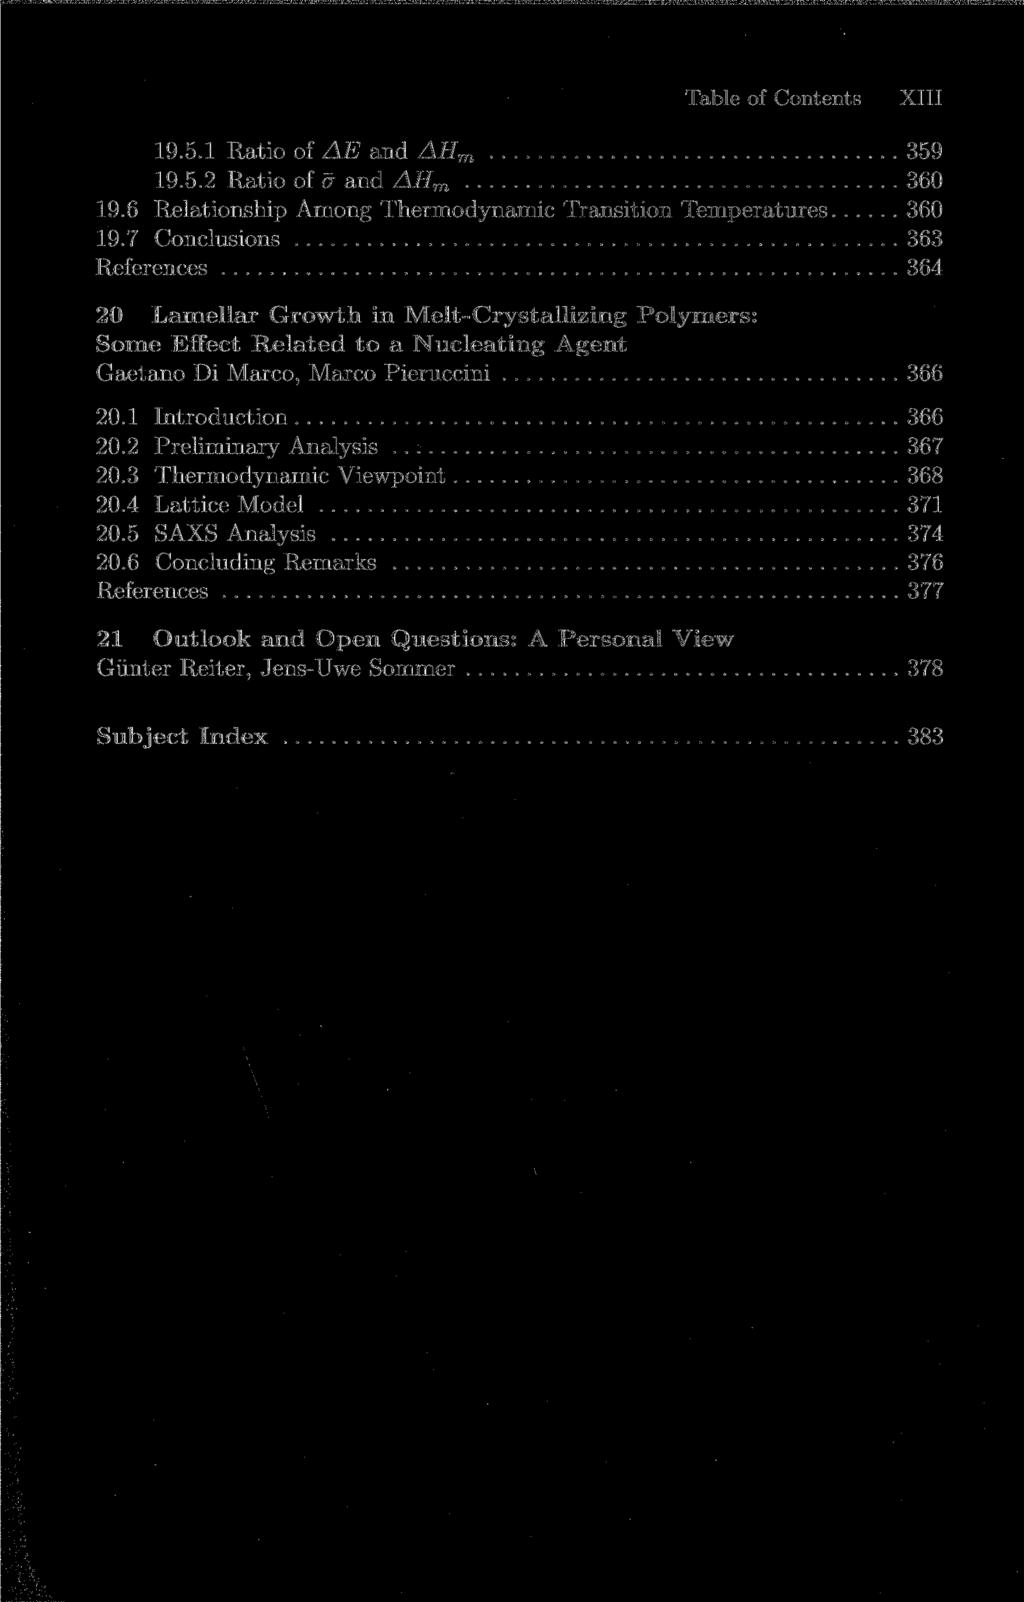 Table of Contents XIII 19.5.1 Ratio of AE and AH m 359 19.5.2 Ratio of a and AH m 360 19.6 Relationship Among Thermodynamic Transition Teniperatures 360 19.